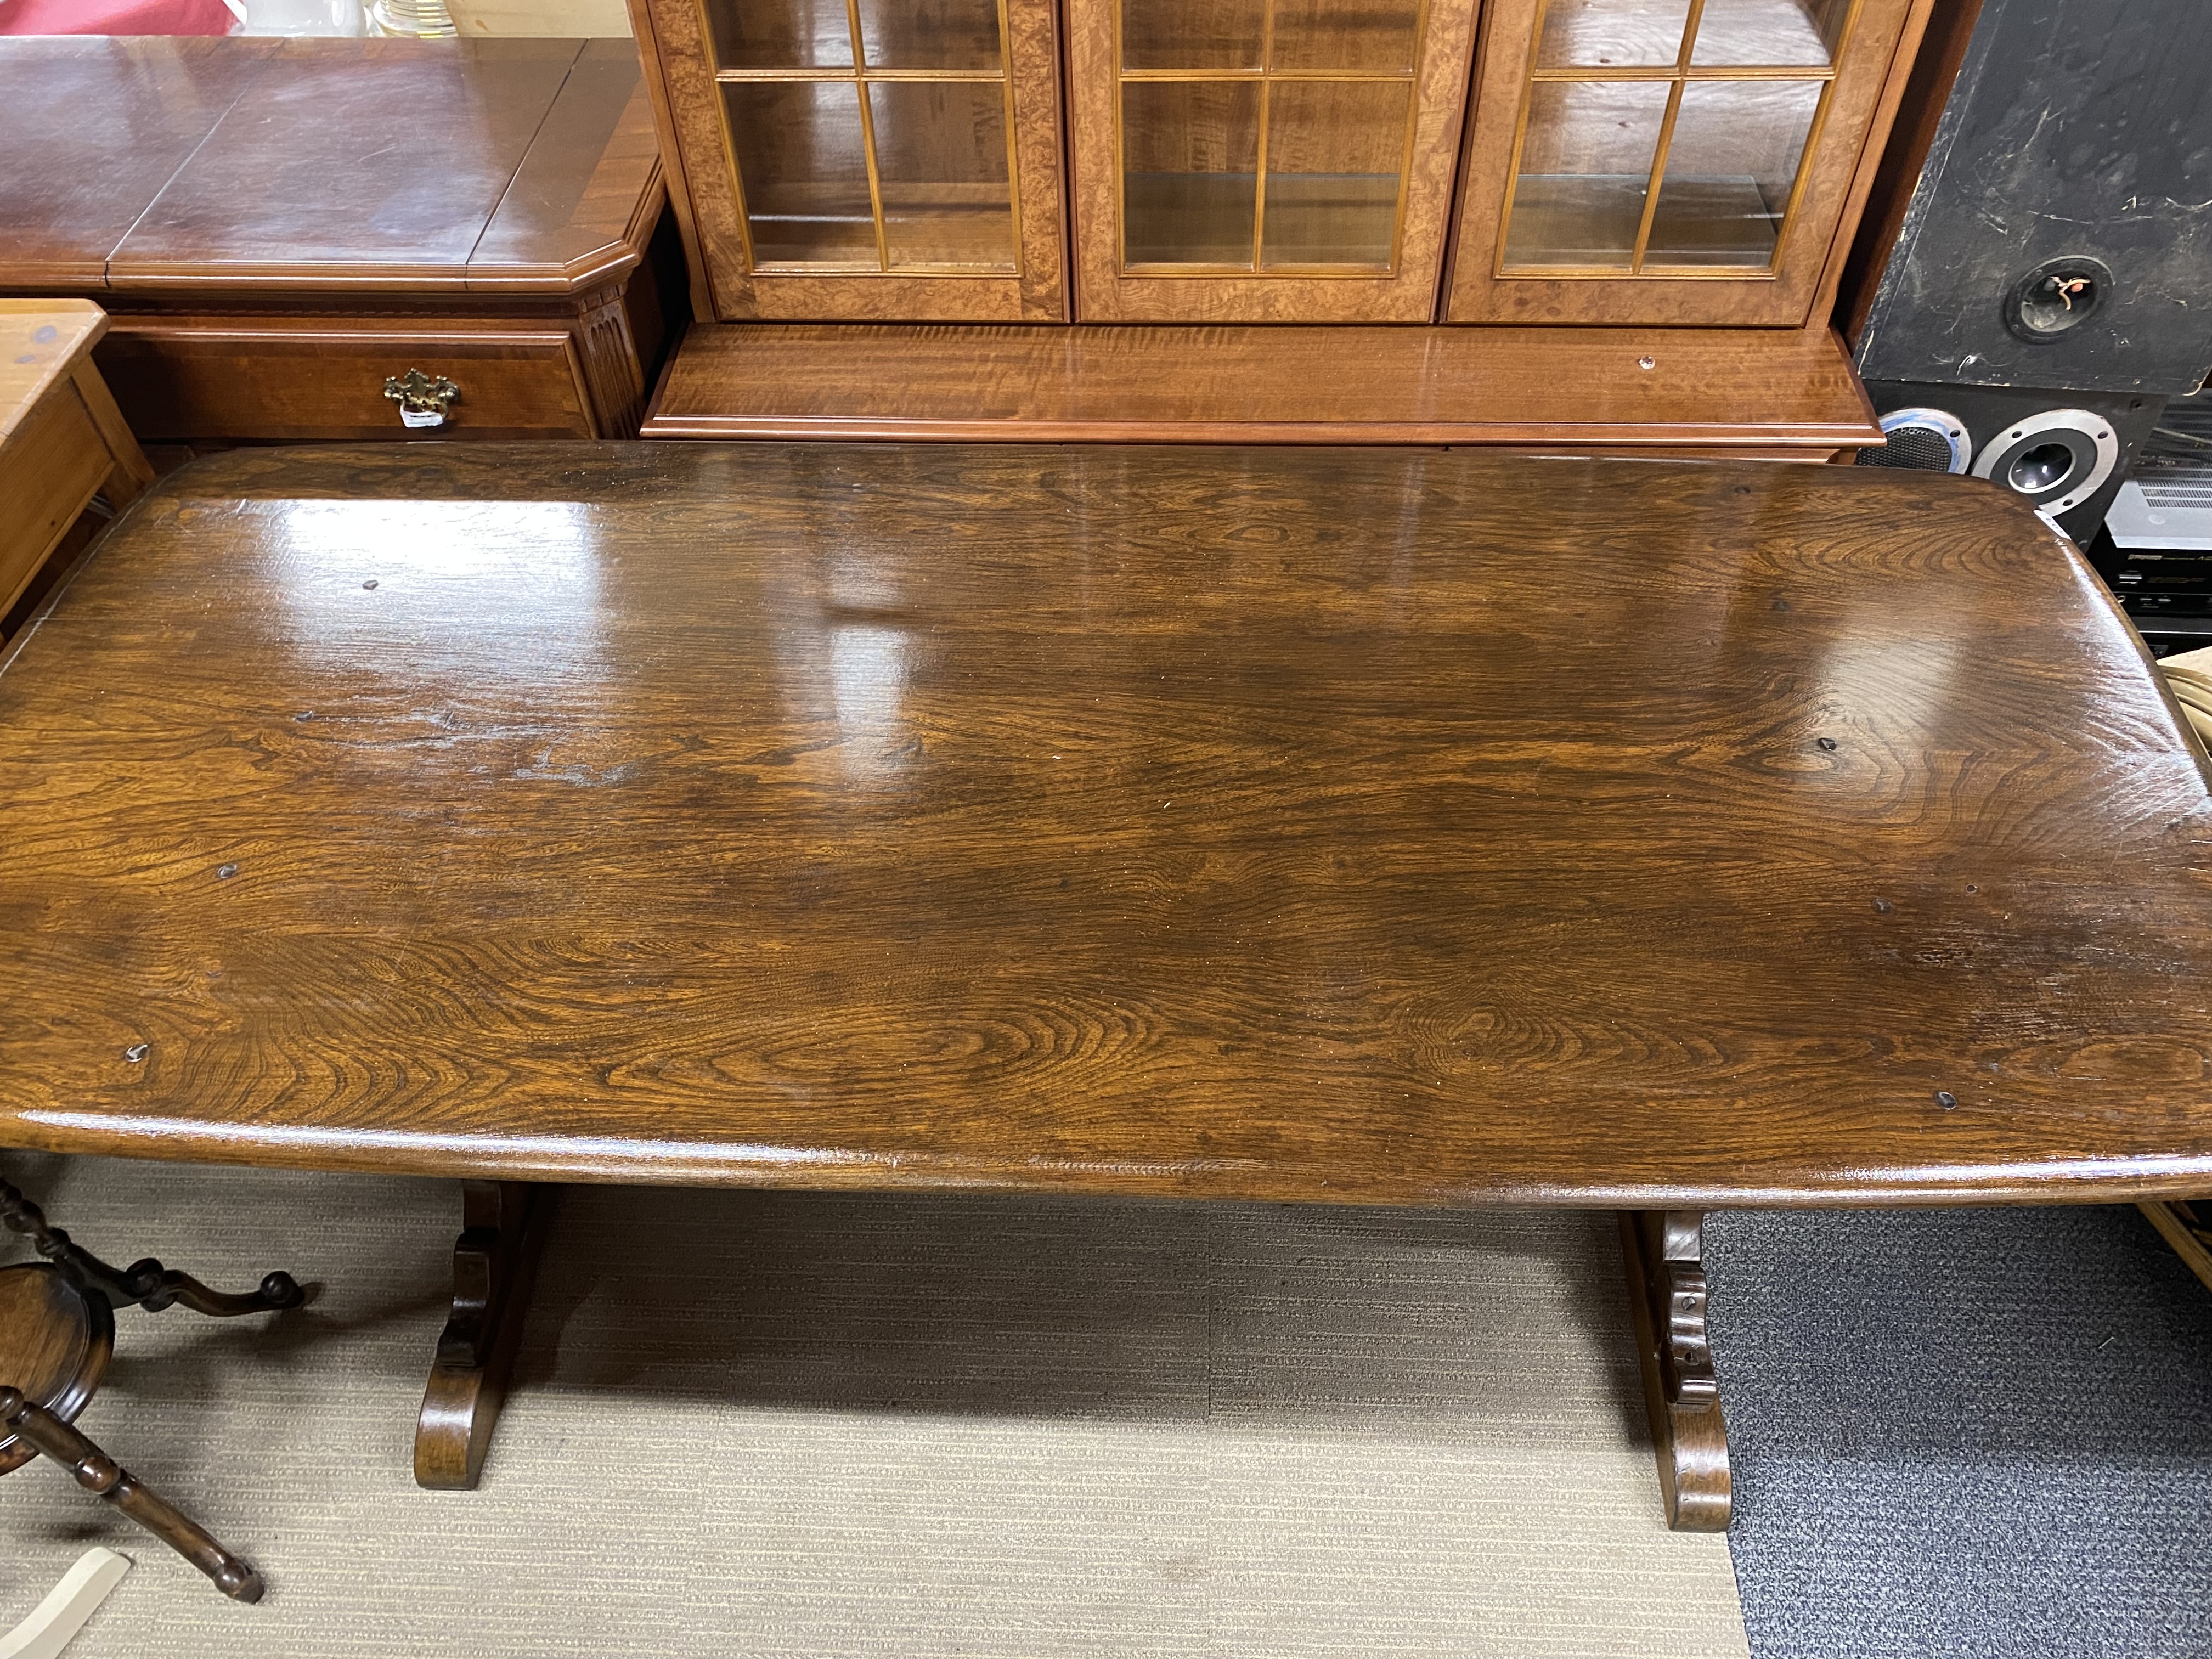 An Ercol 'Old Colonial' oak refectory table with antique waxed finish, L. 183cm. - Image 2 of 3